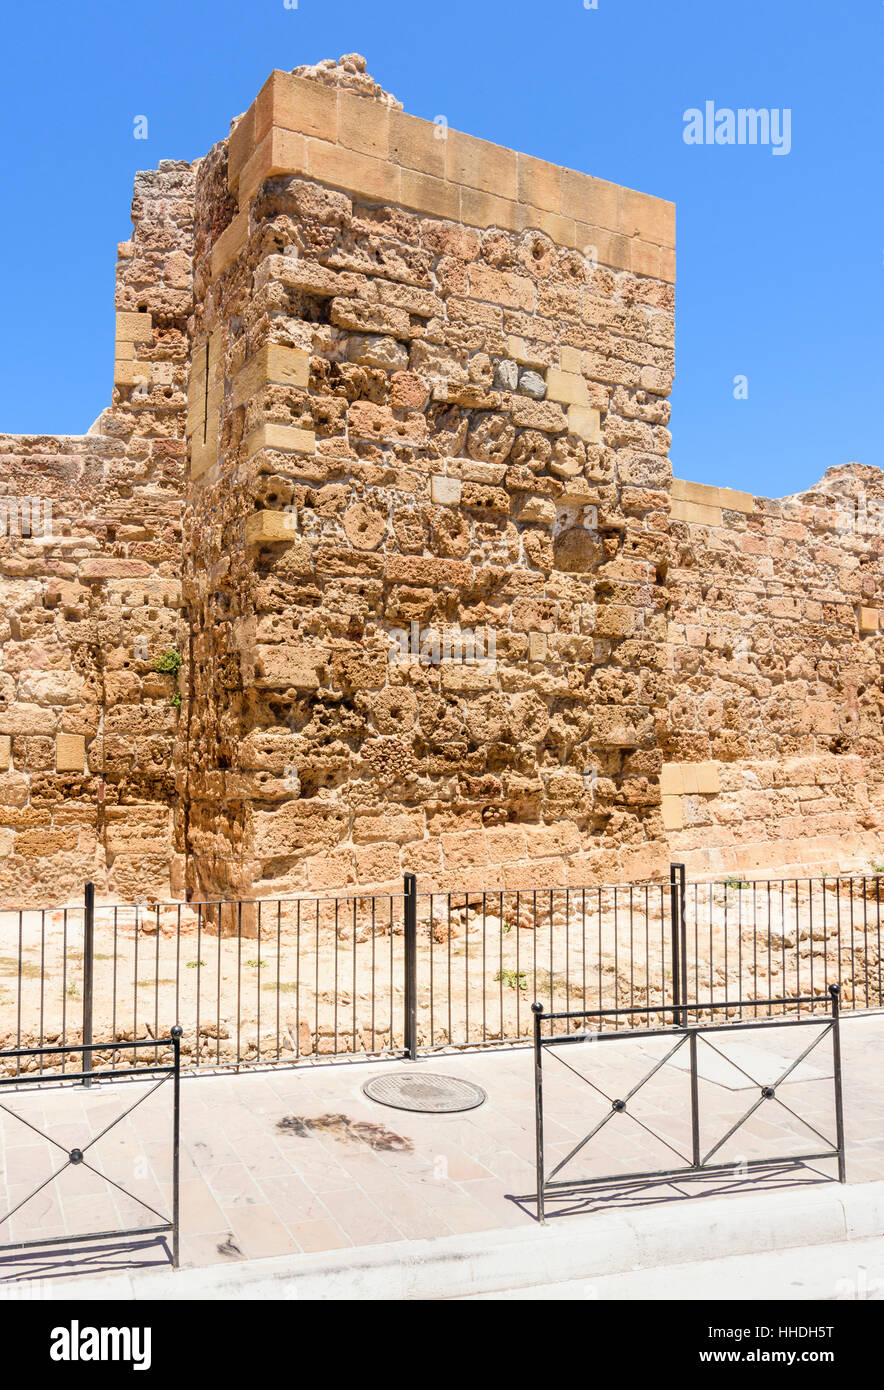 Part of the old Byzantine wall of Chania, Crete, Greece Stock Photo